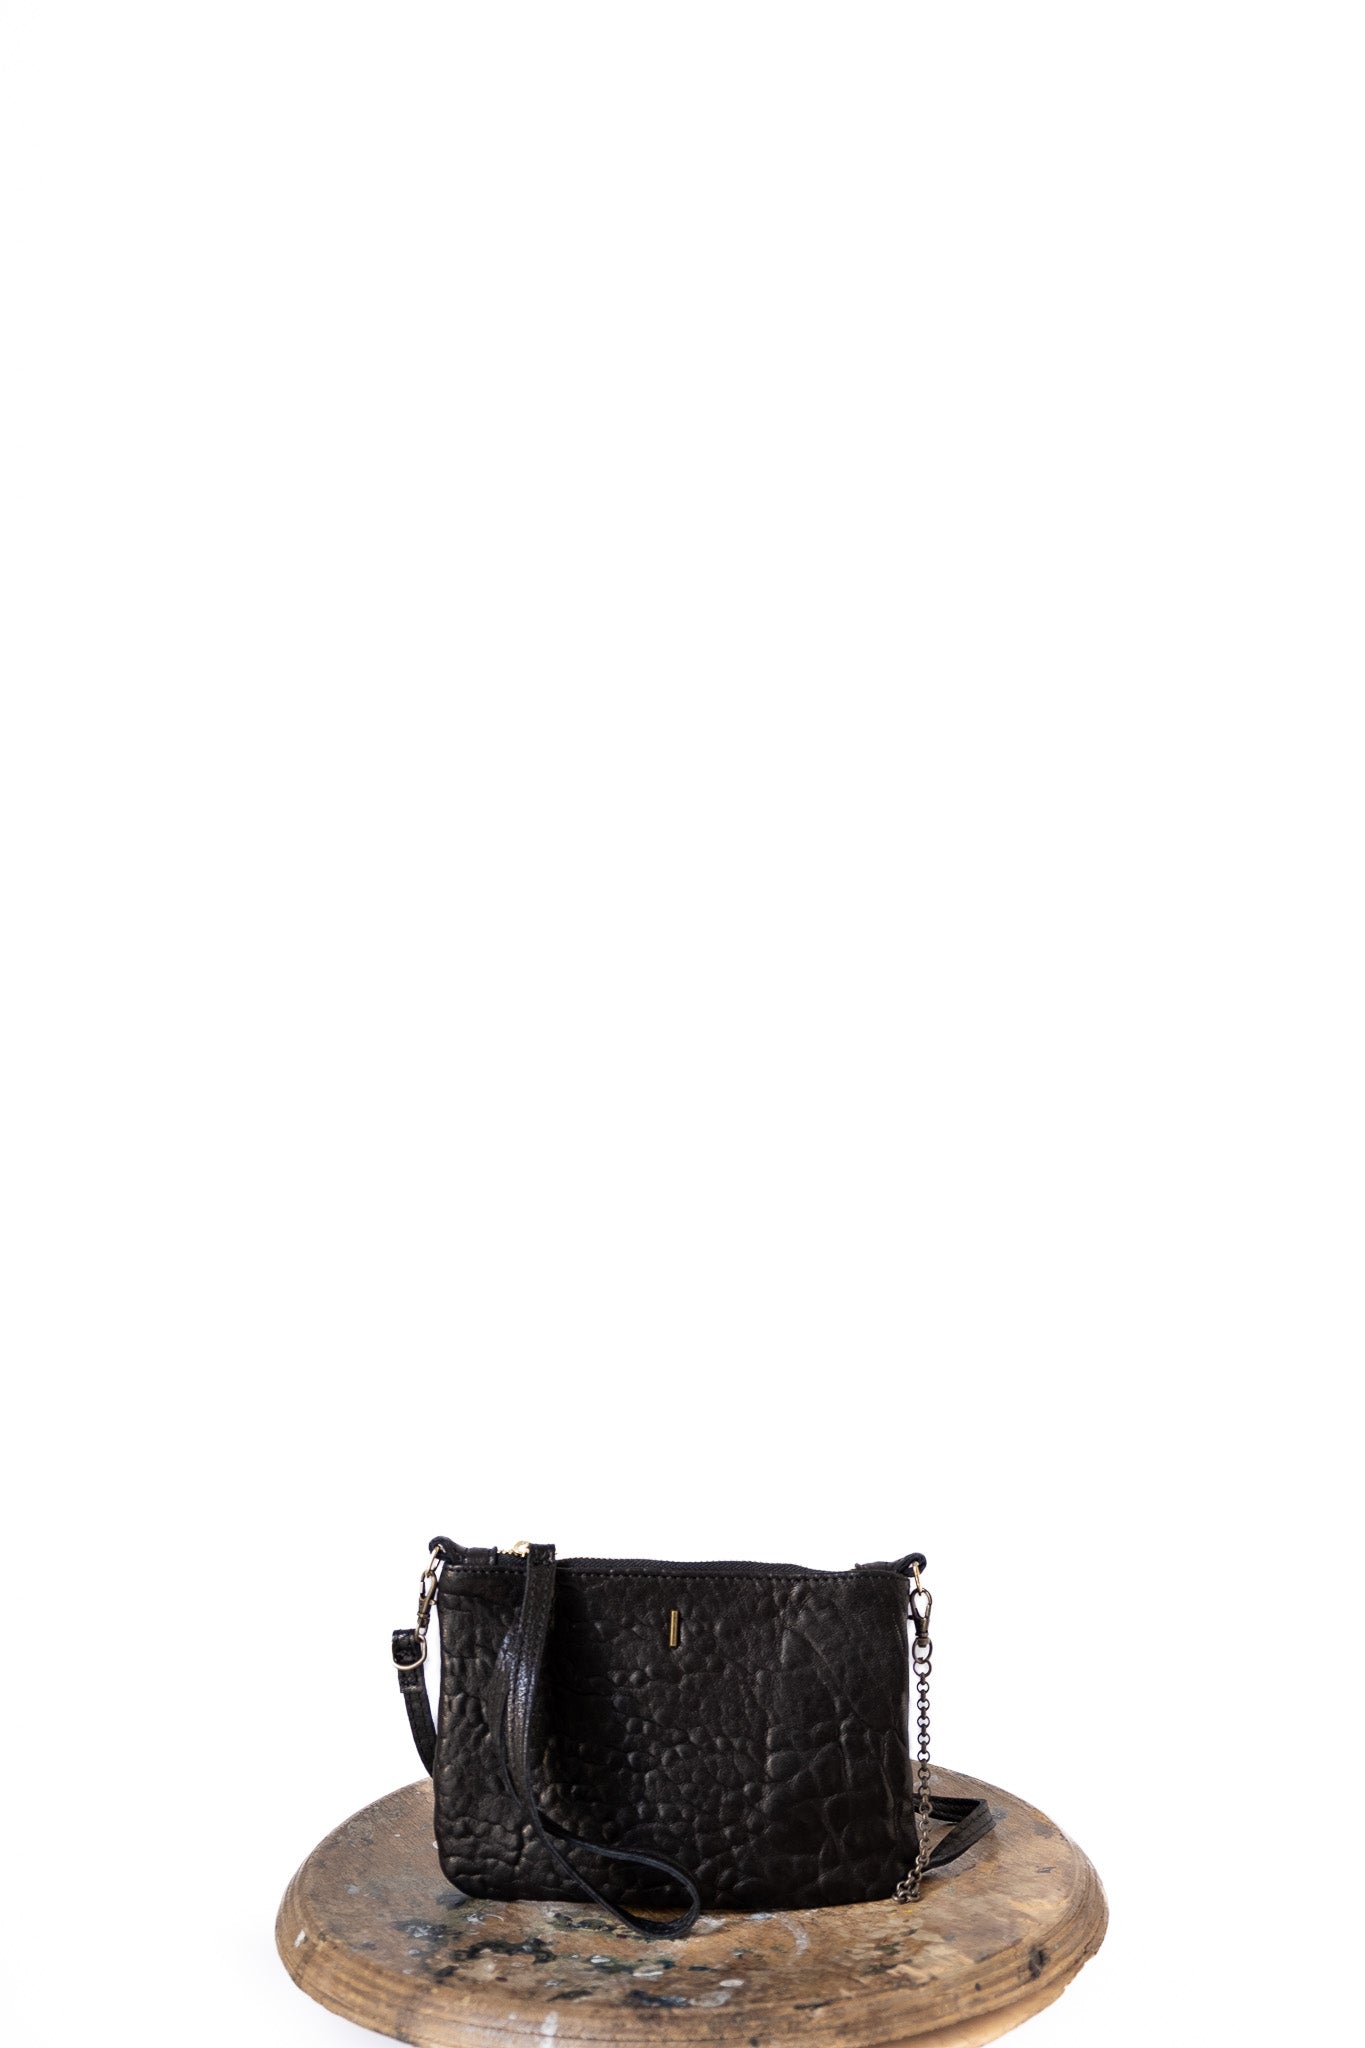 Tina pochette in black mutton vegetable leather